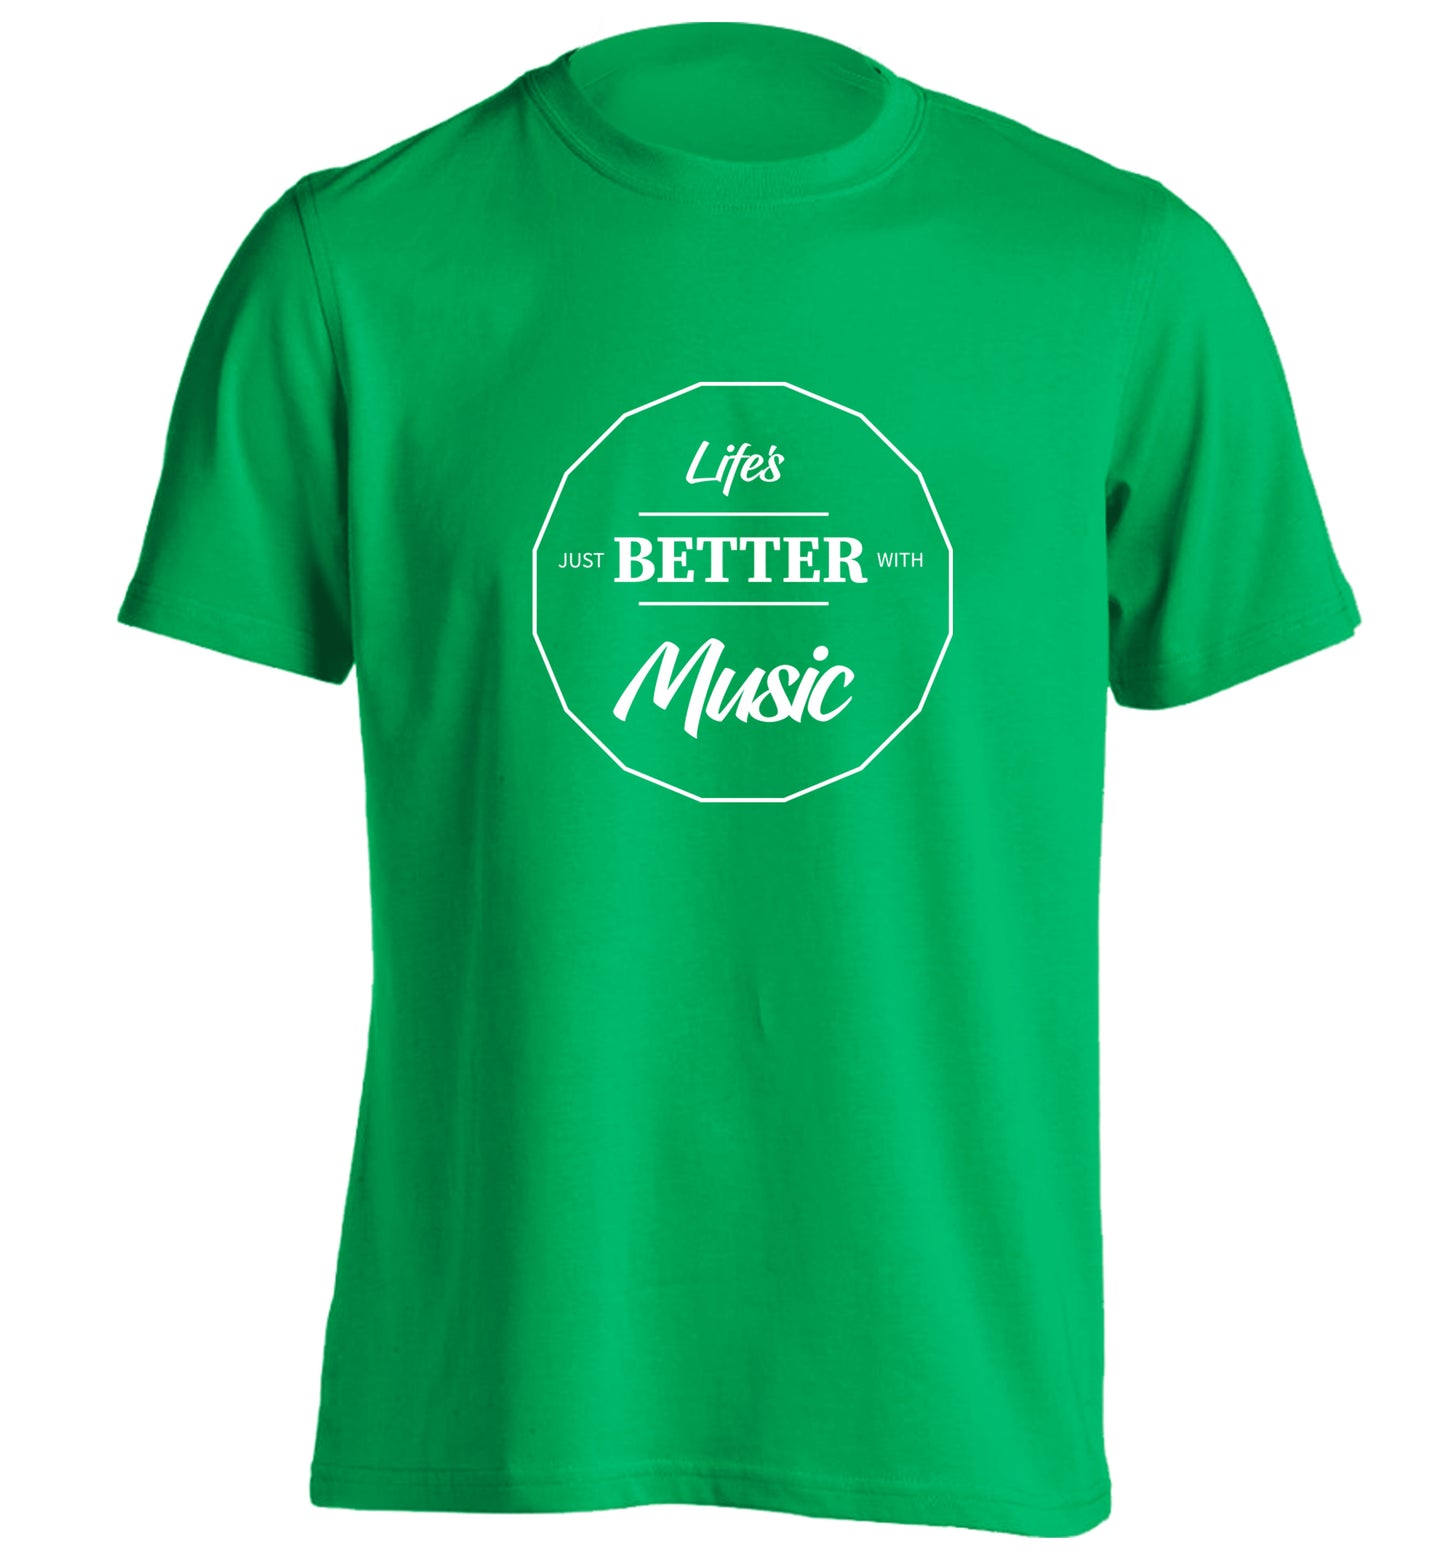 Life is Better With Music adults unisex green Tshirt 2XL